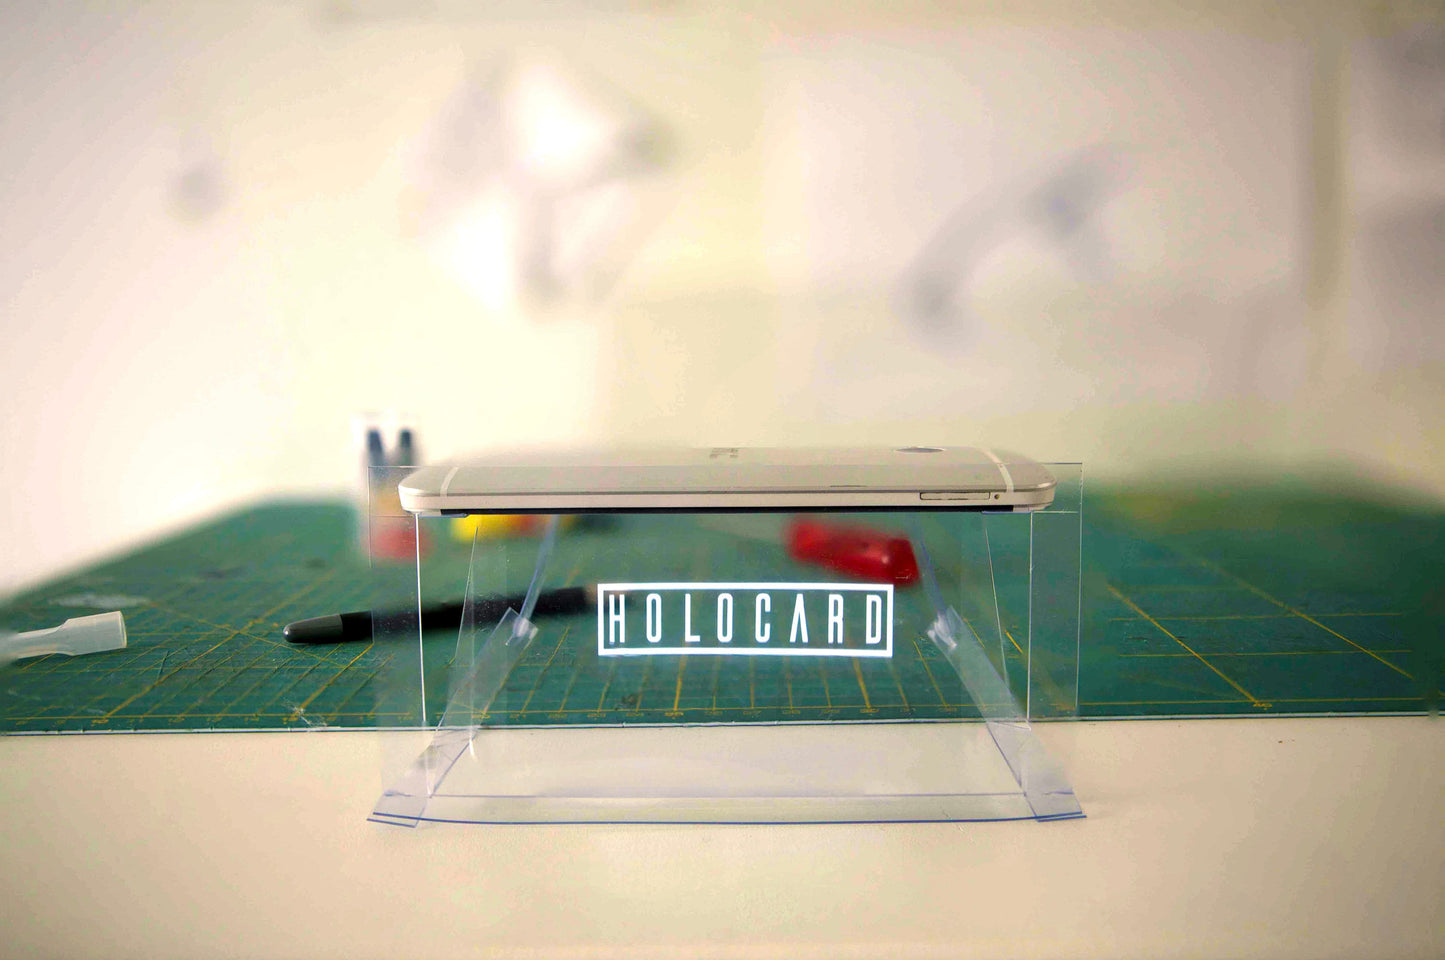 HOLOCARD | Hologram display for smartphones | Use this new tech gadget to view holograms with your smartphone | New tech accessory